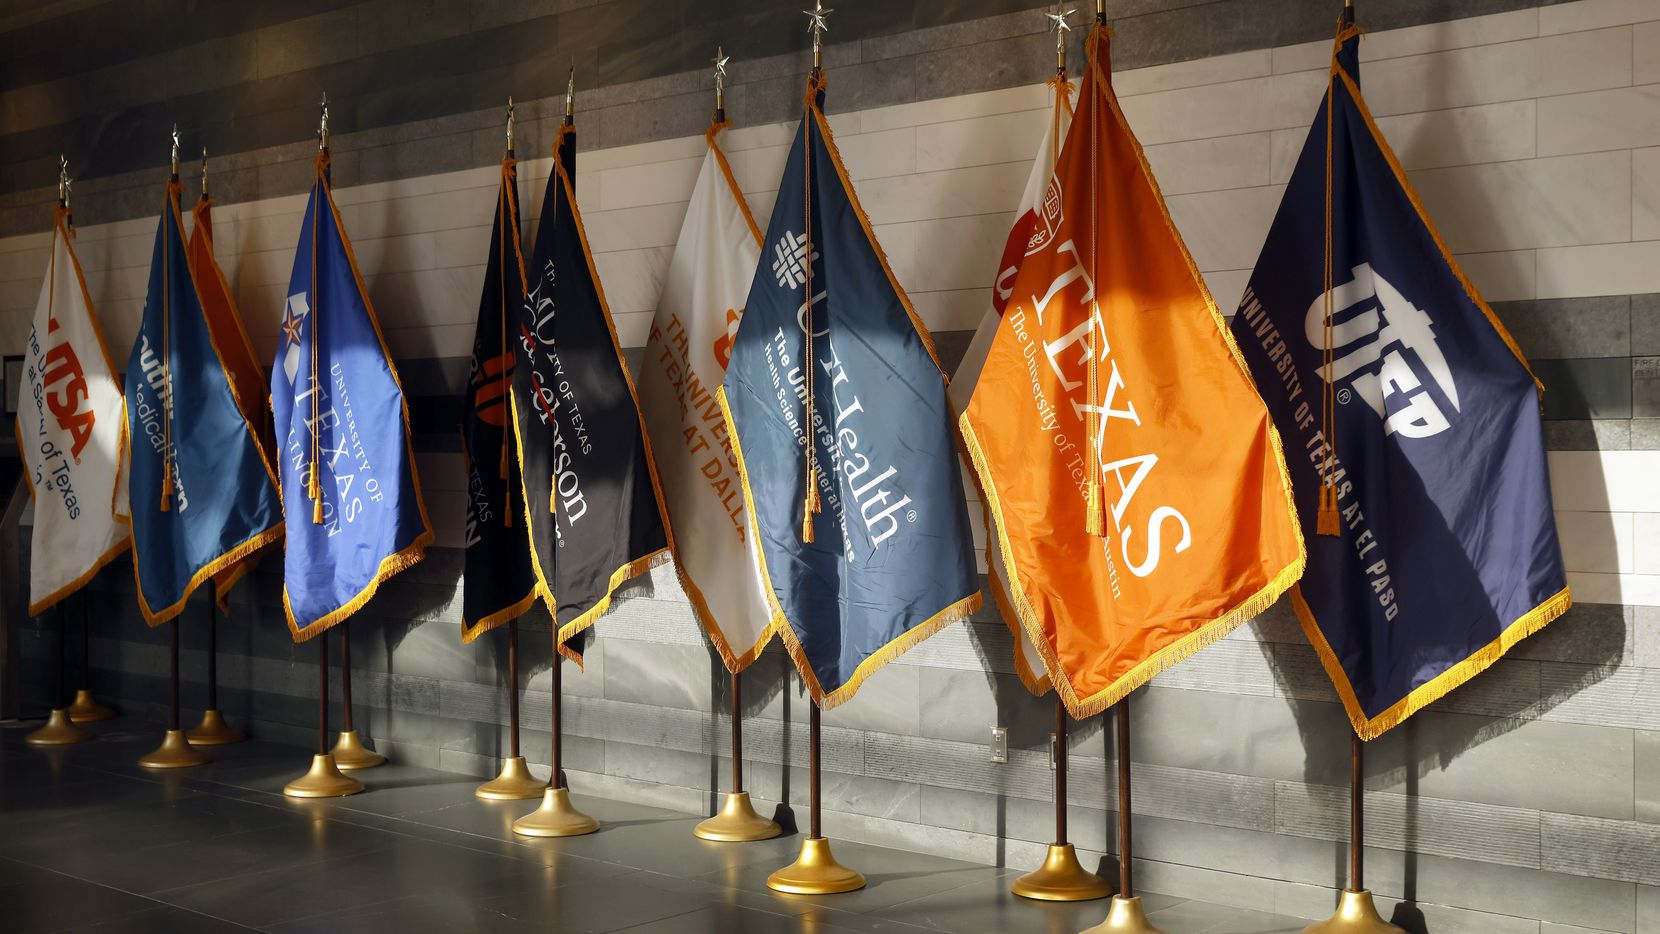 Flags representing the many campuses in the University of Texas system are on display in the...